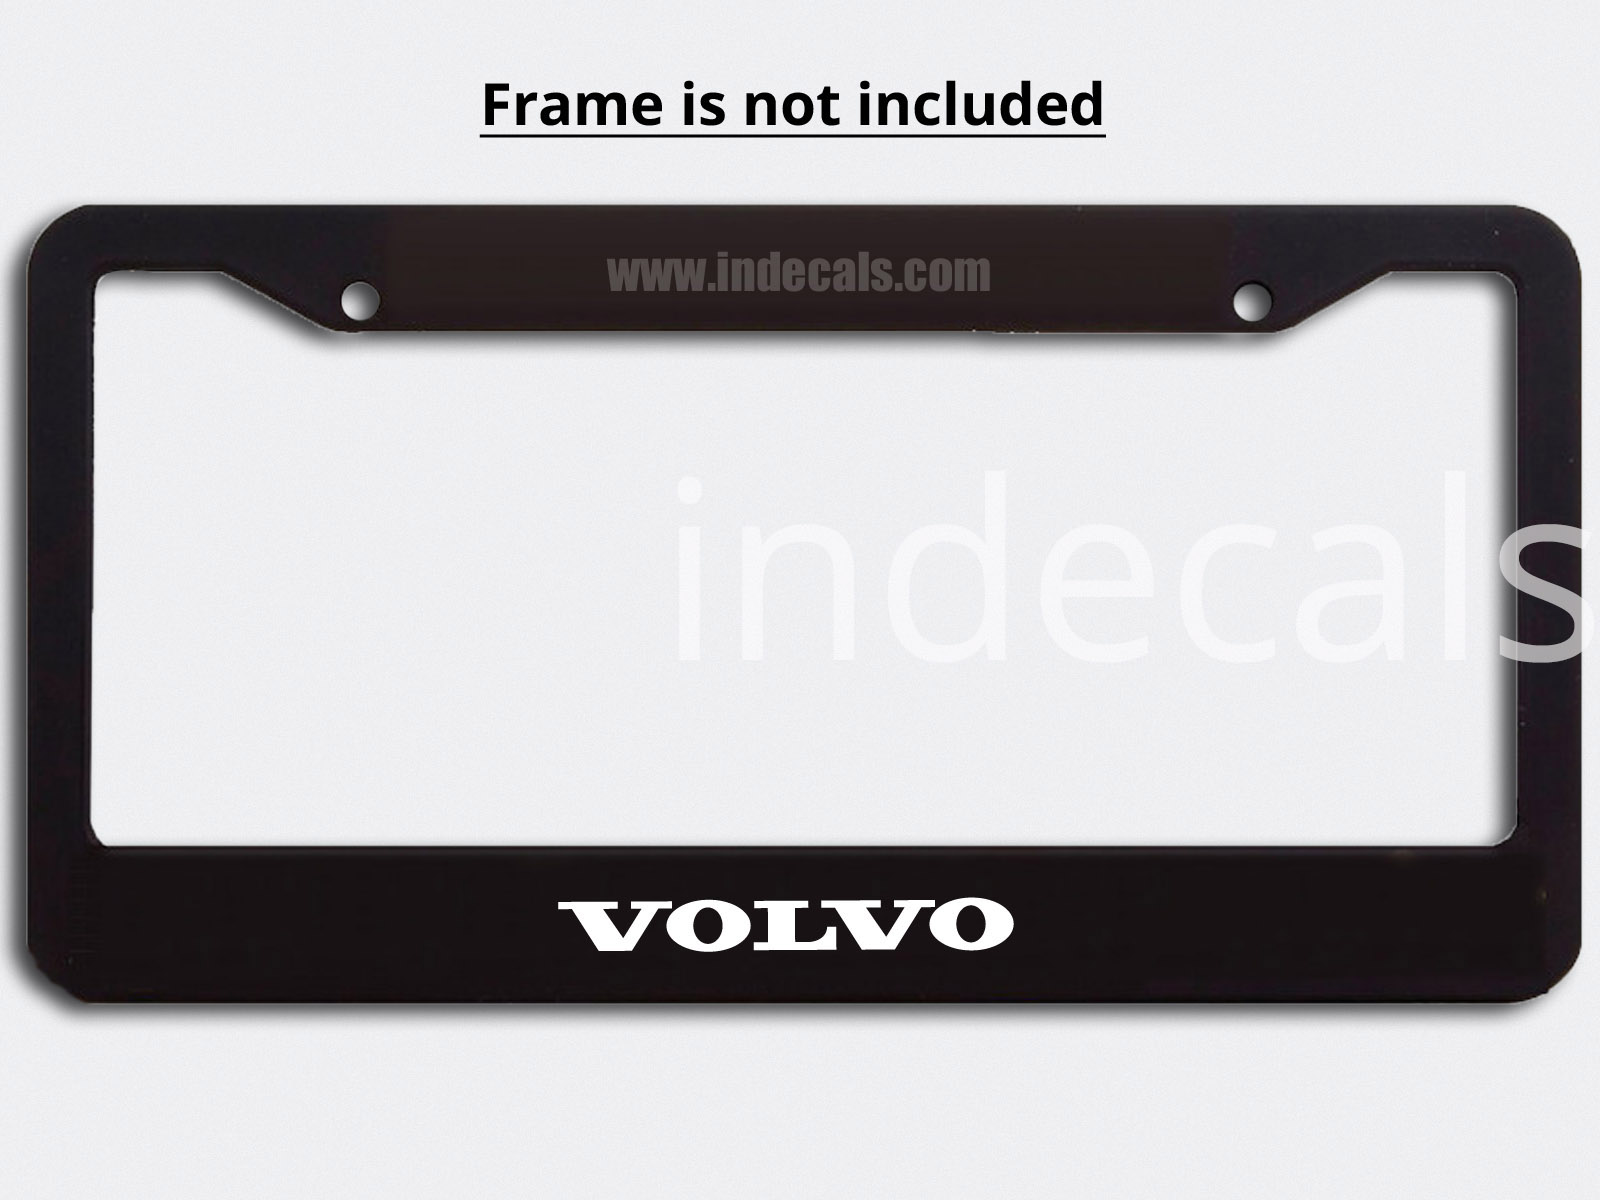 3 x Volvo Stickers for Plate Frame - White